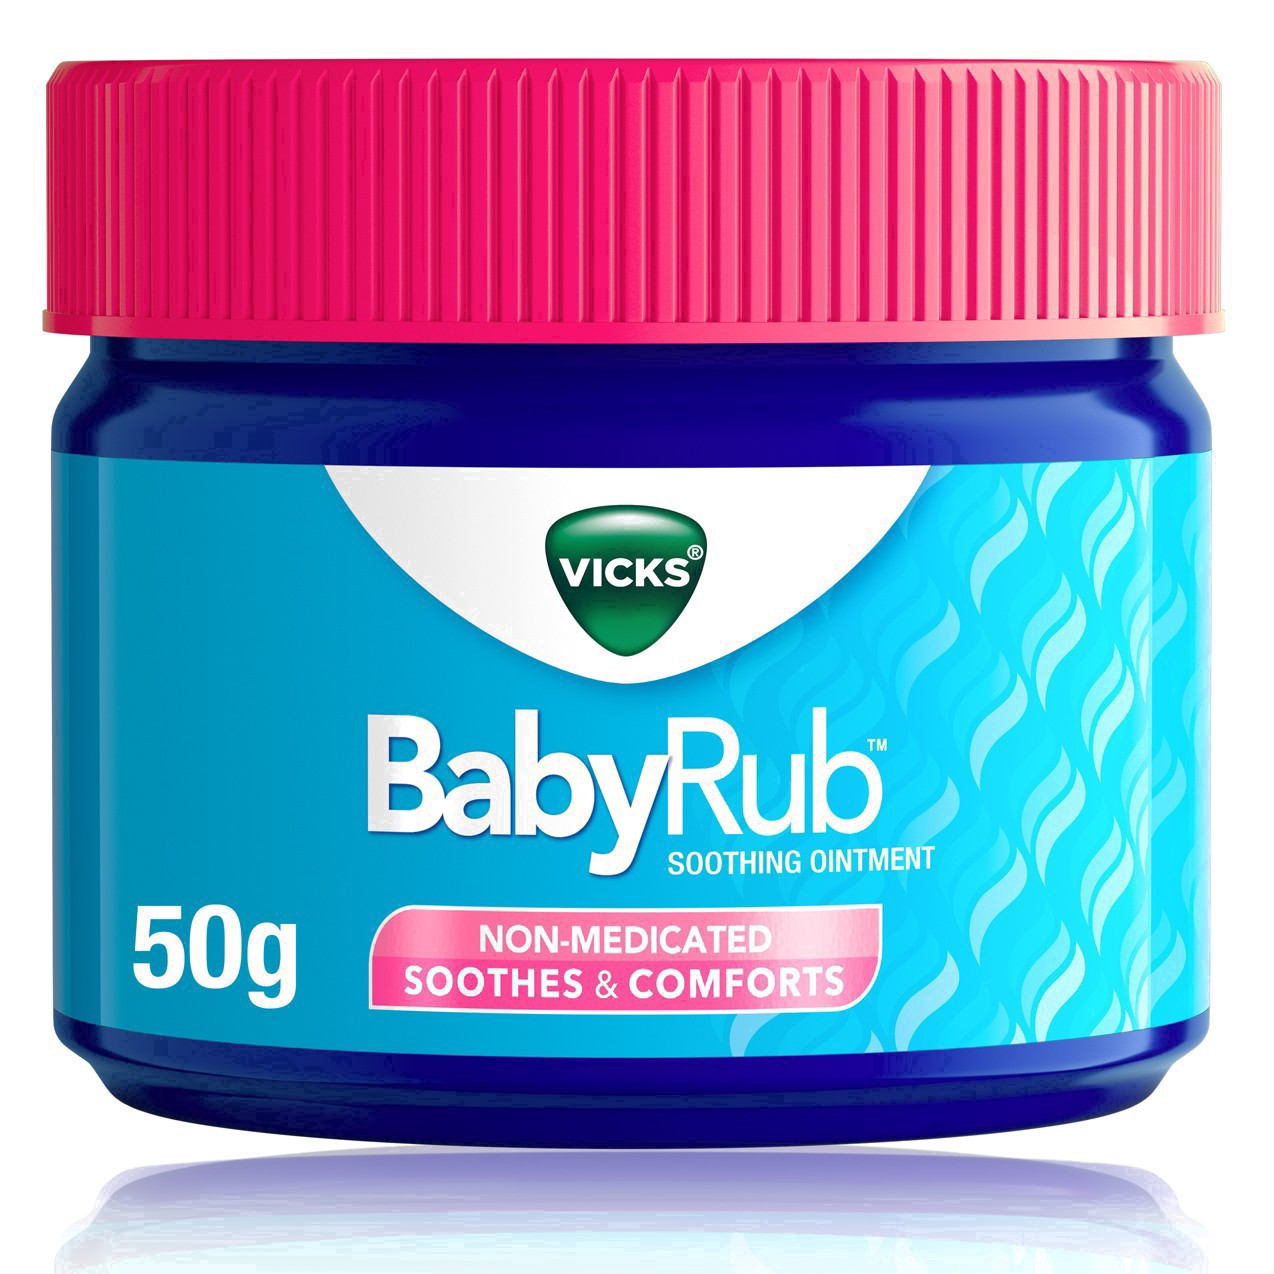 slide 22 of 78, Vicks BabyRub, Chest Rub Ointment with Soothing Aloe, Eucalyptus, Lavender, and Rosemary, from The Makers of VapoRub, 1.76 oz, 1.76 oz